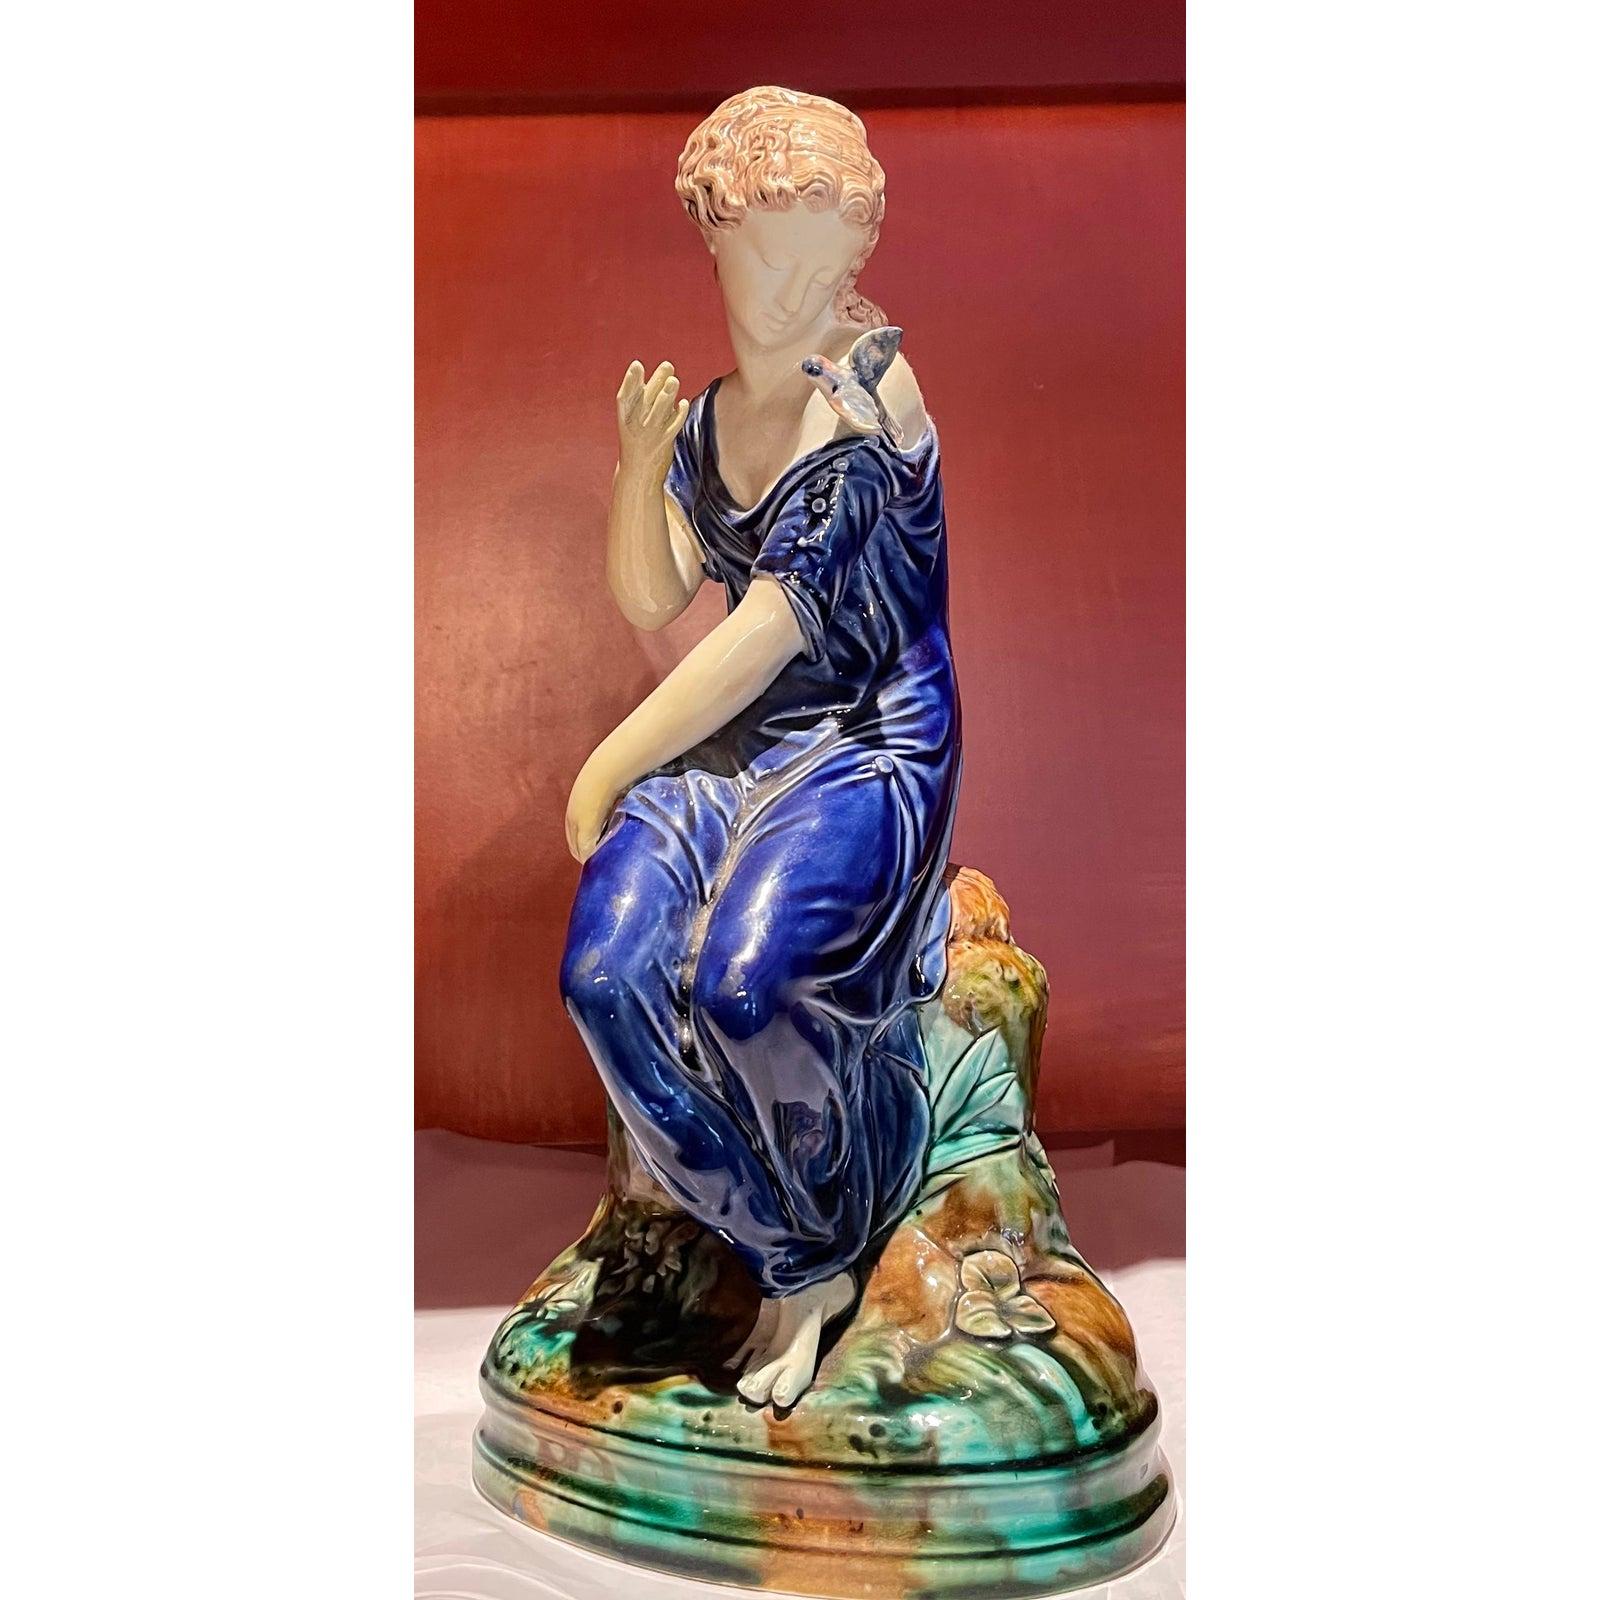 Continental 19th century majolica pottery figure of a lady and bird
Additional information:
Materials: Pottery
Color: Blue
Period: 19th century
Styles: Figurative
Item Type: Vintage, antique or pre-owned
Dimensions: 6